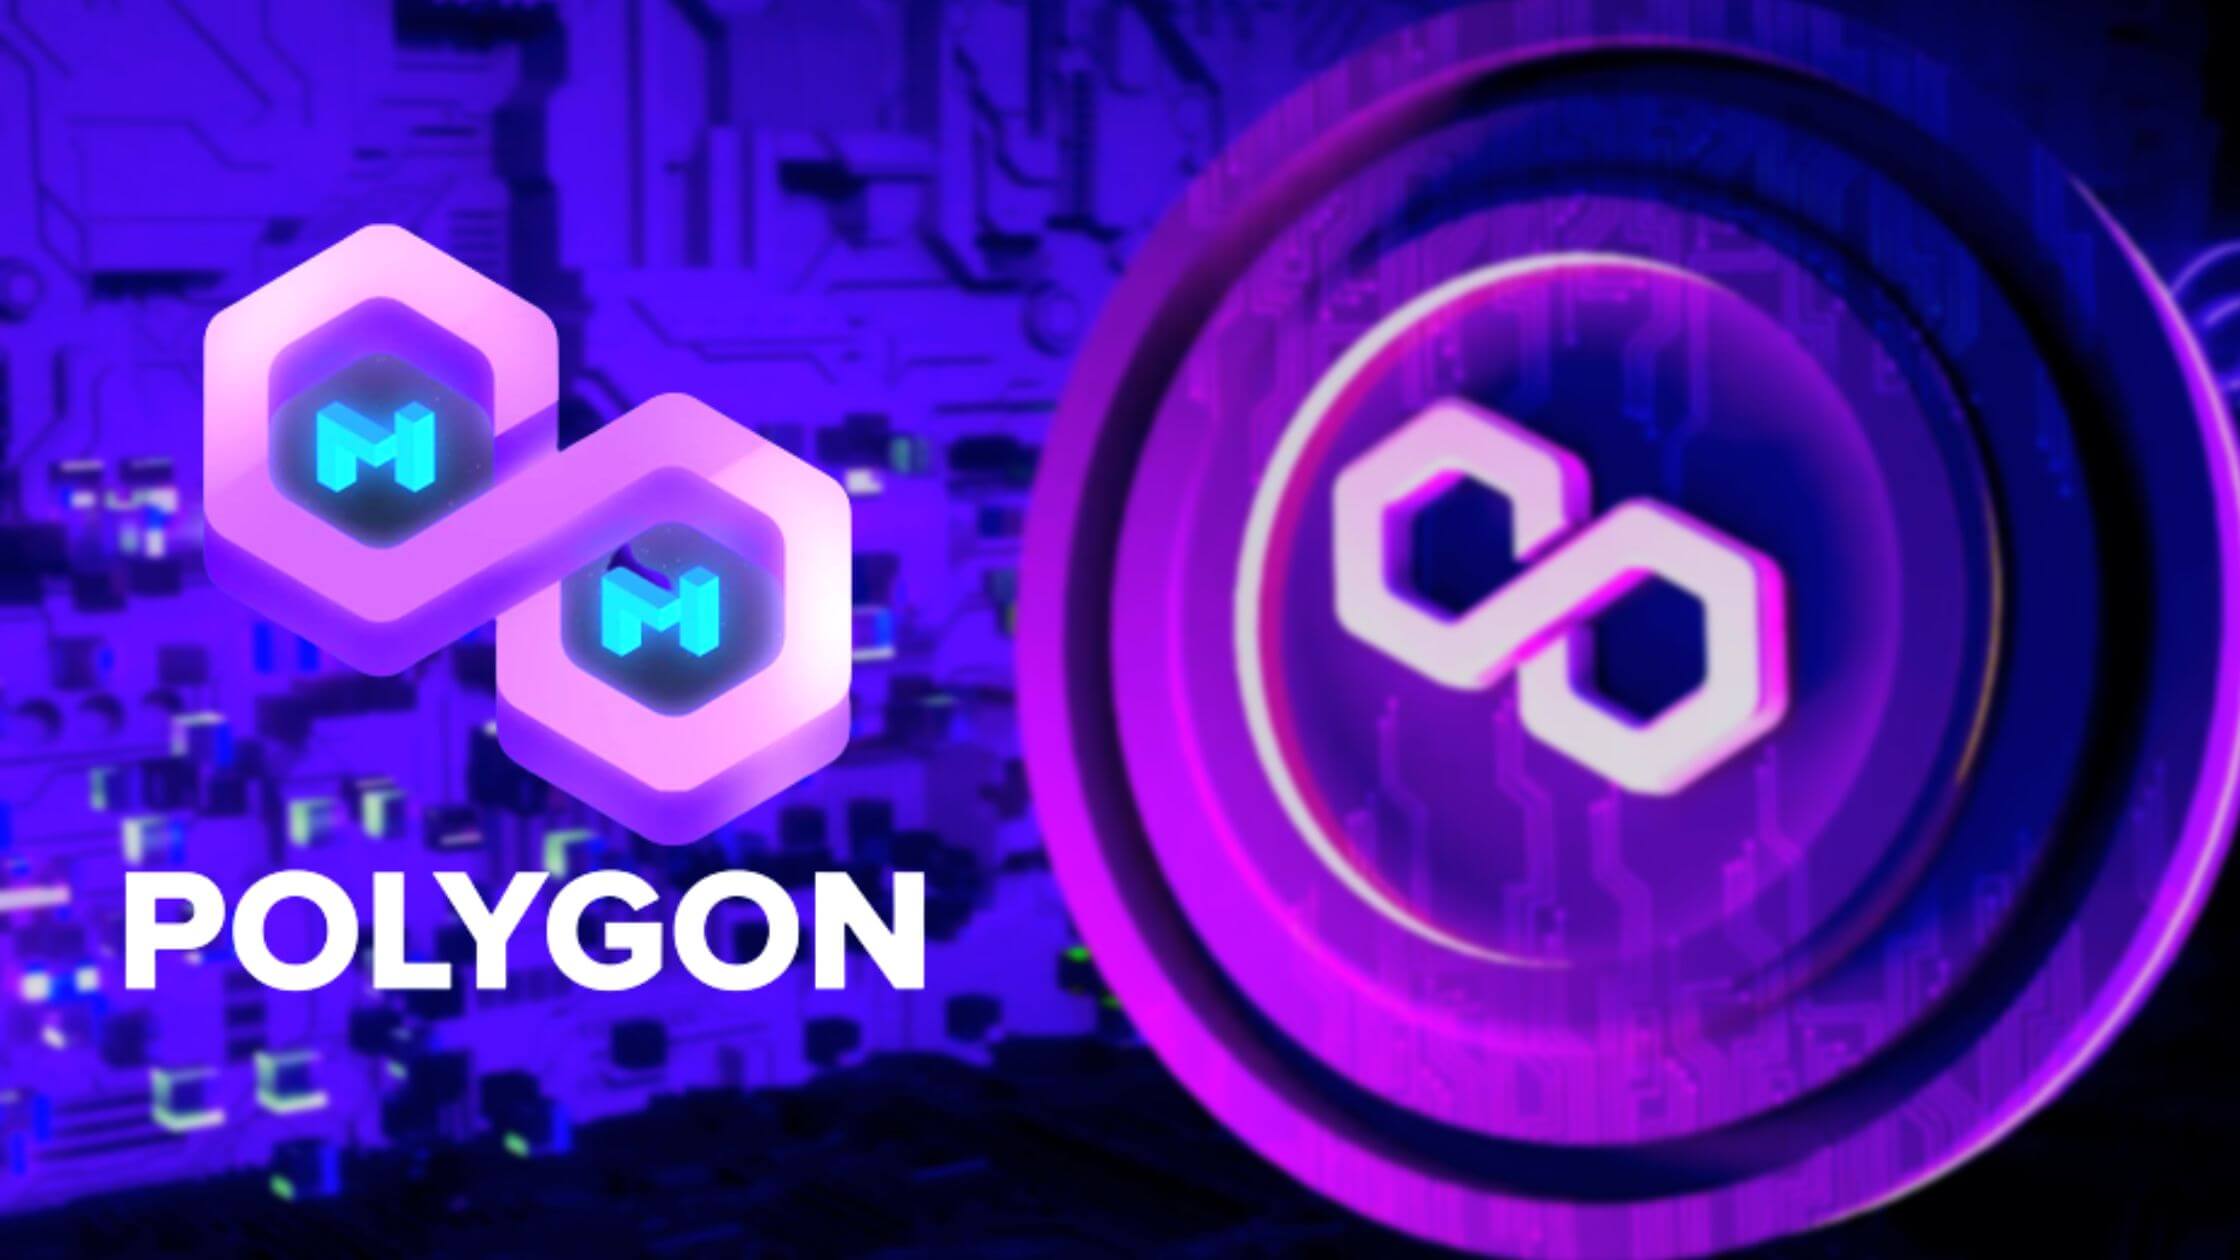 About polygon